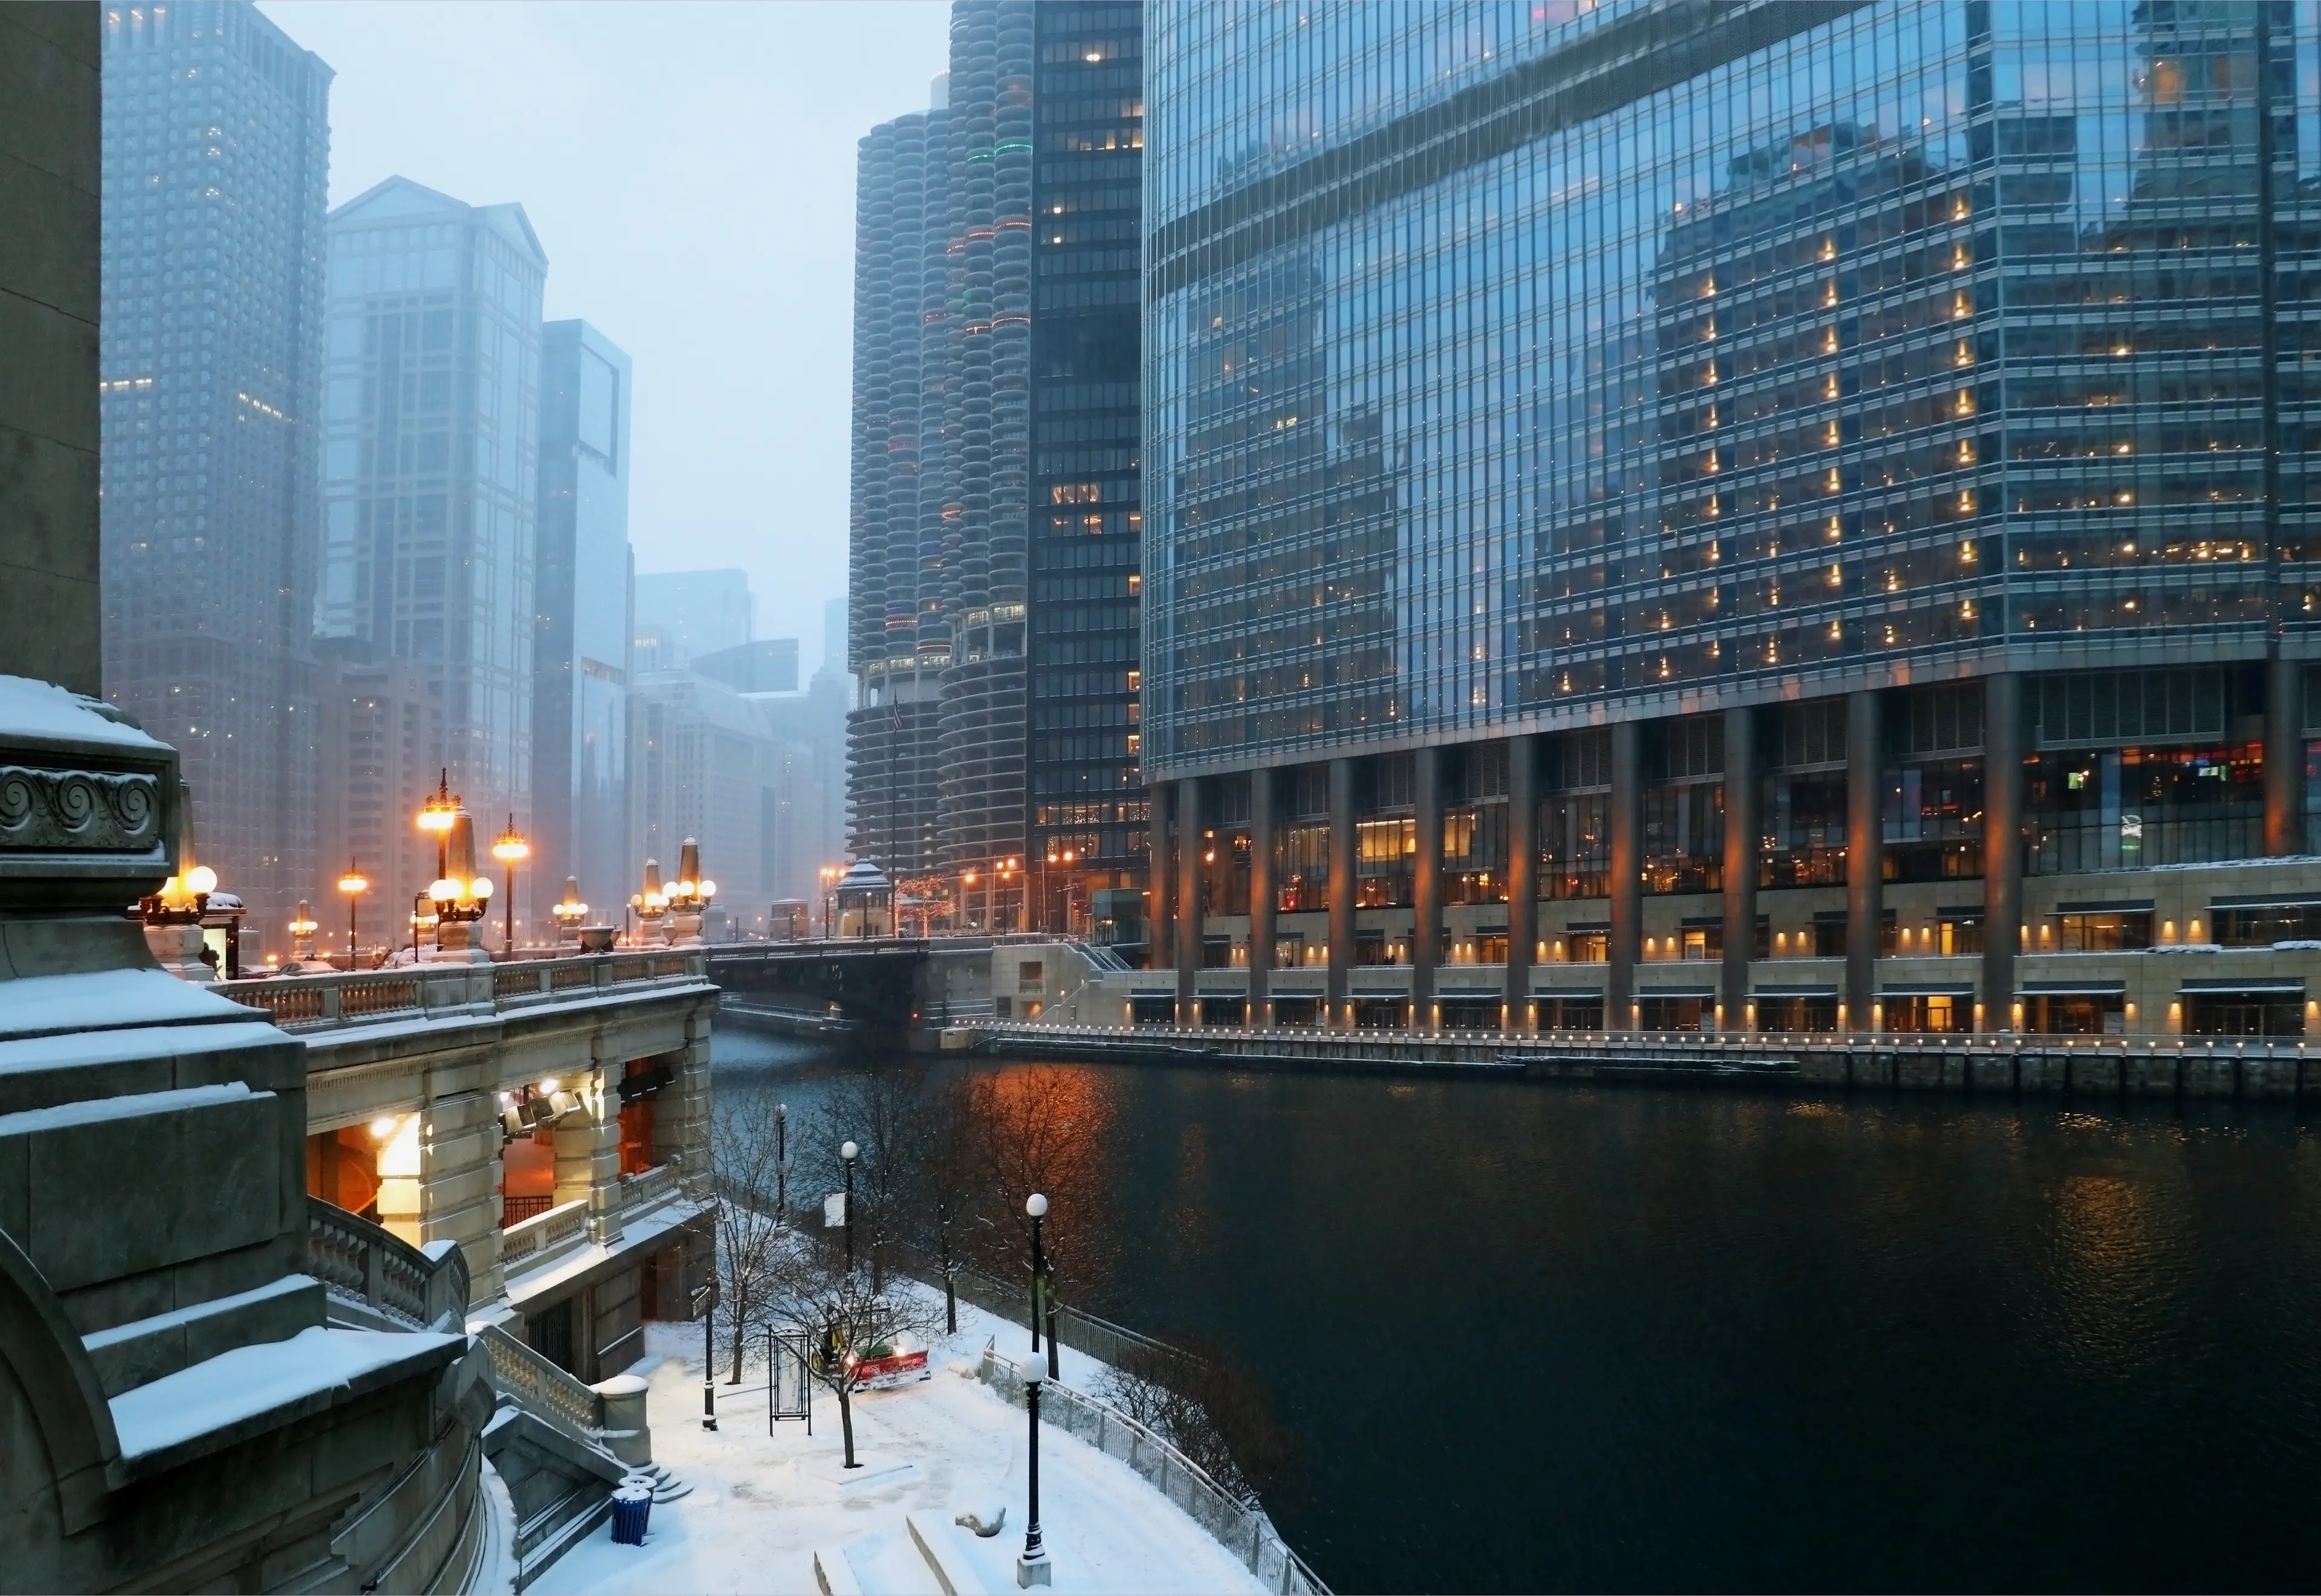 5-Day Romantic Christmas Holiday Itinerary in Chicago